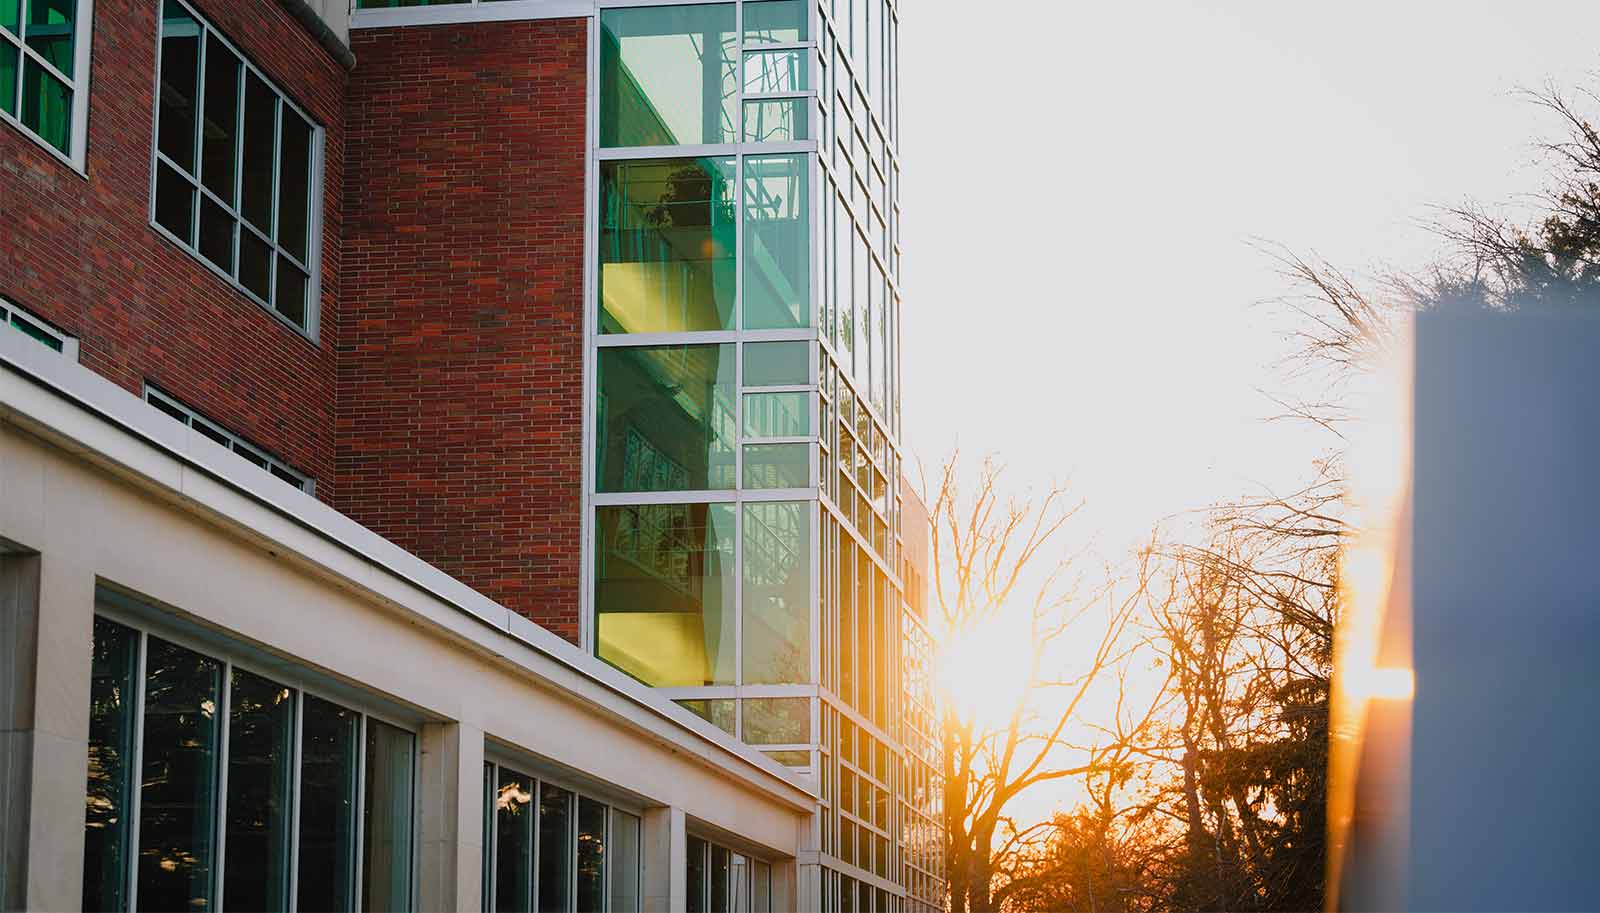 The sun sets on a campus building.